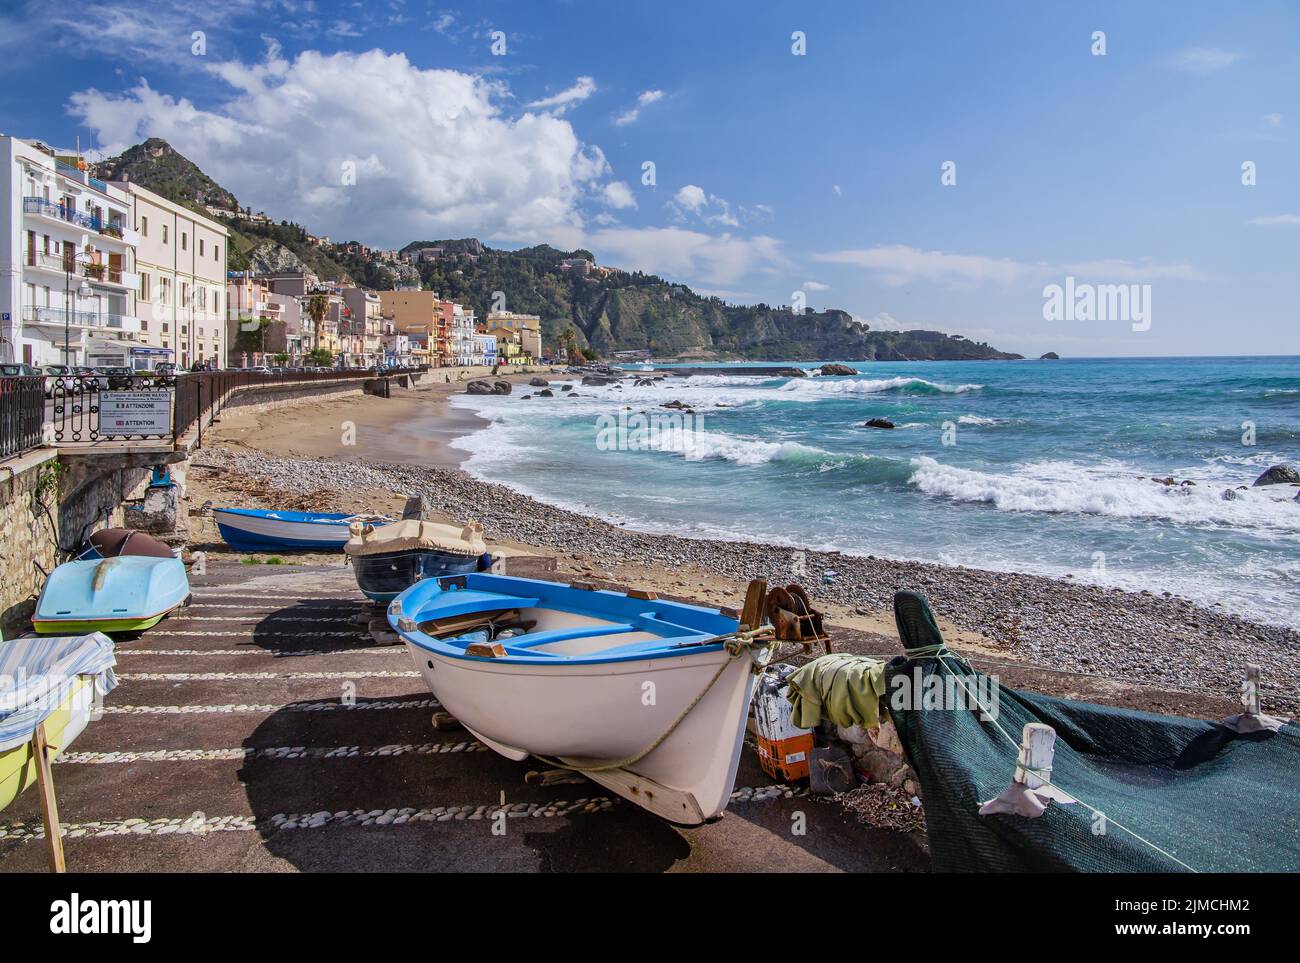 Fishing boats on the beach with sea surf in front of the promenade, Giardini-Naxos, east coast, Sicily, Italy Stock Photo